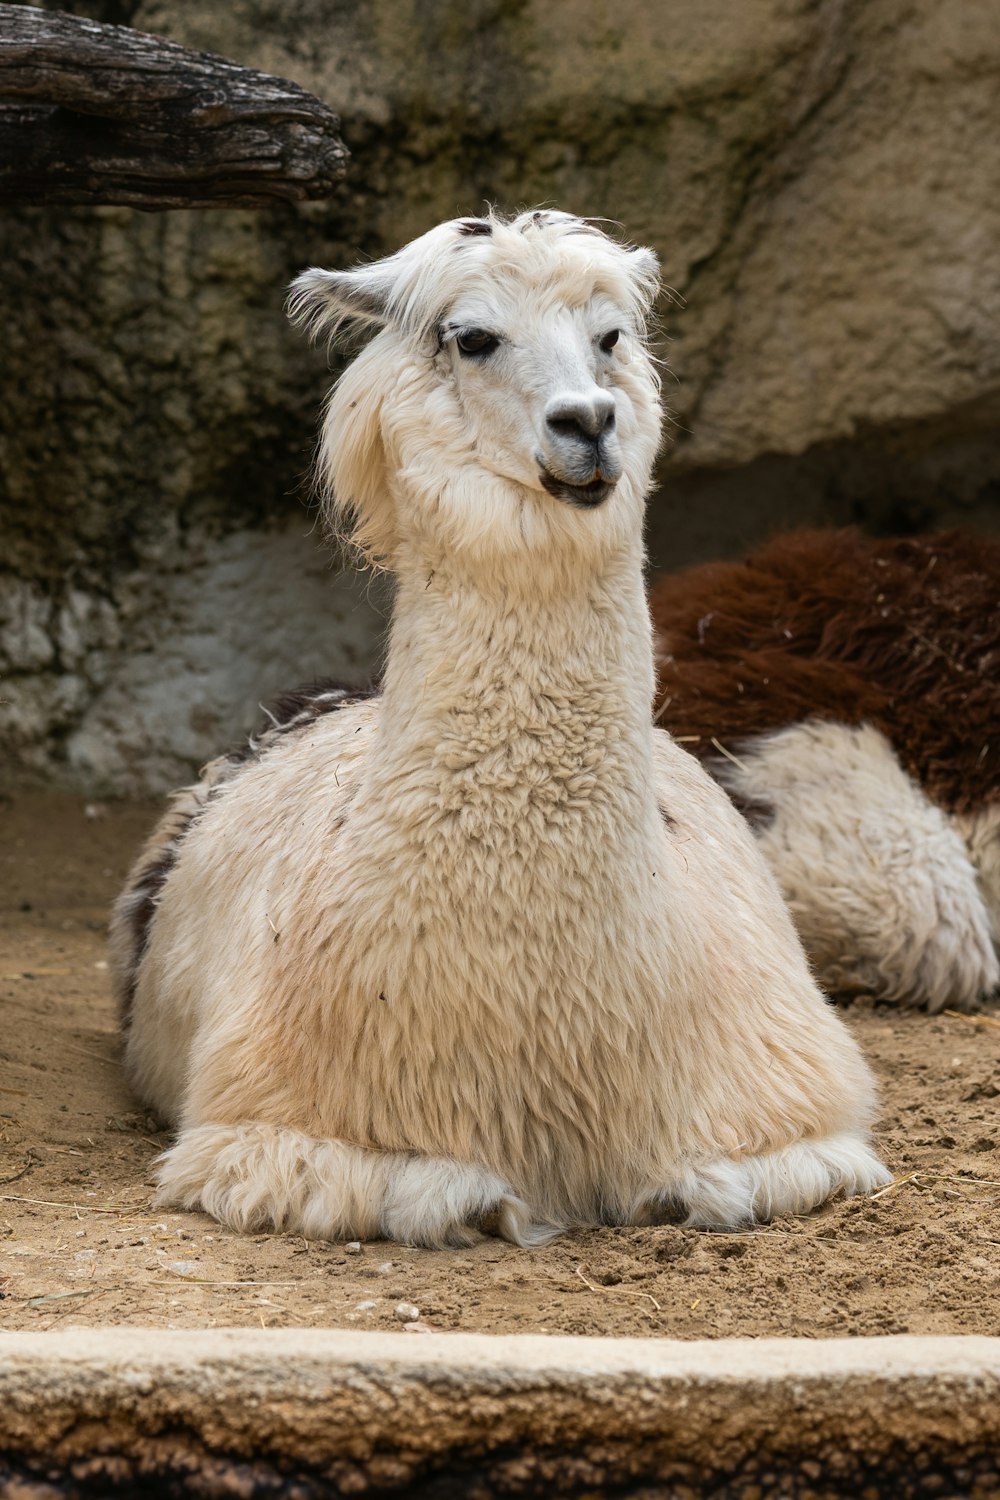 a close up of a llama laying on the ground